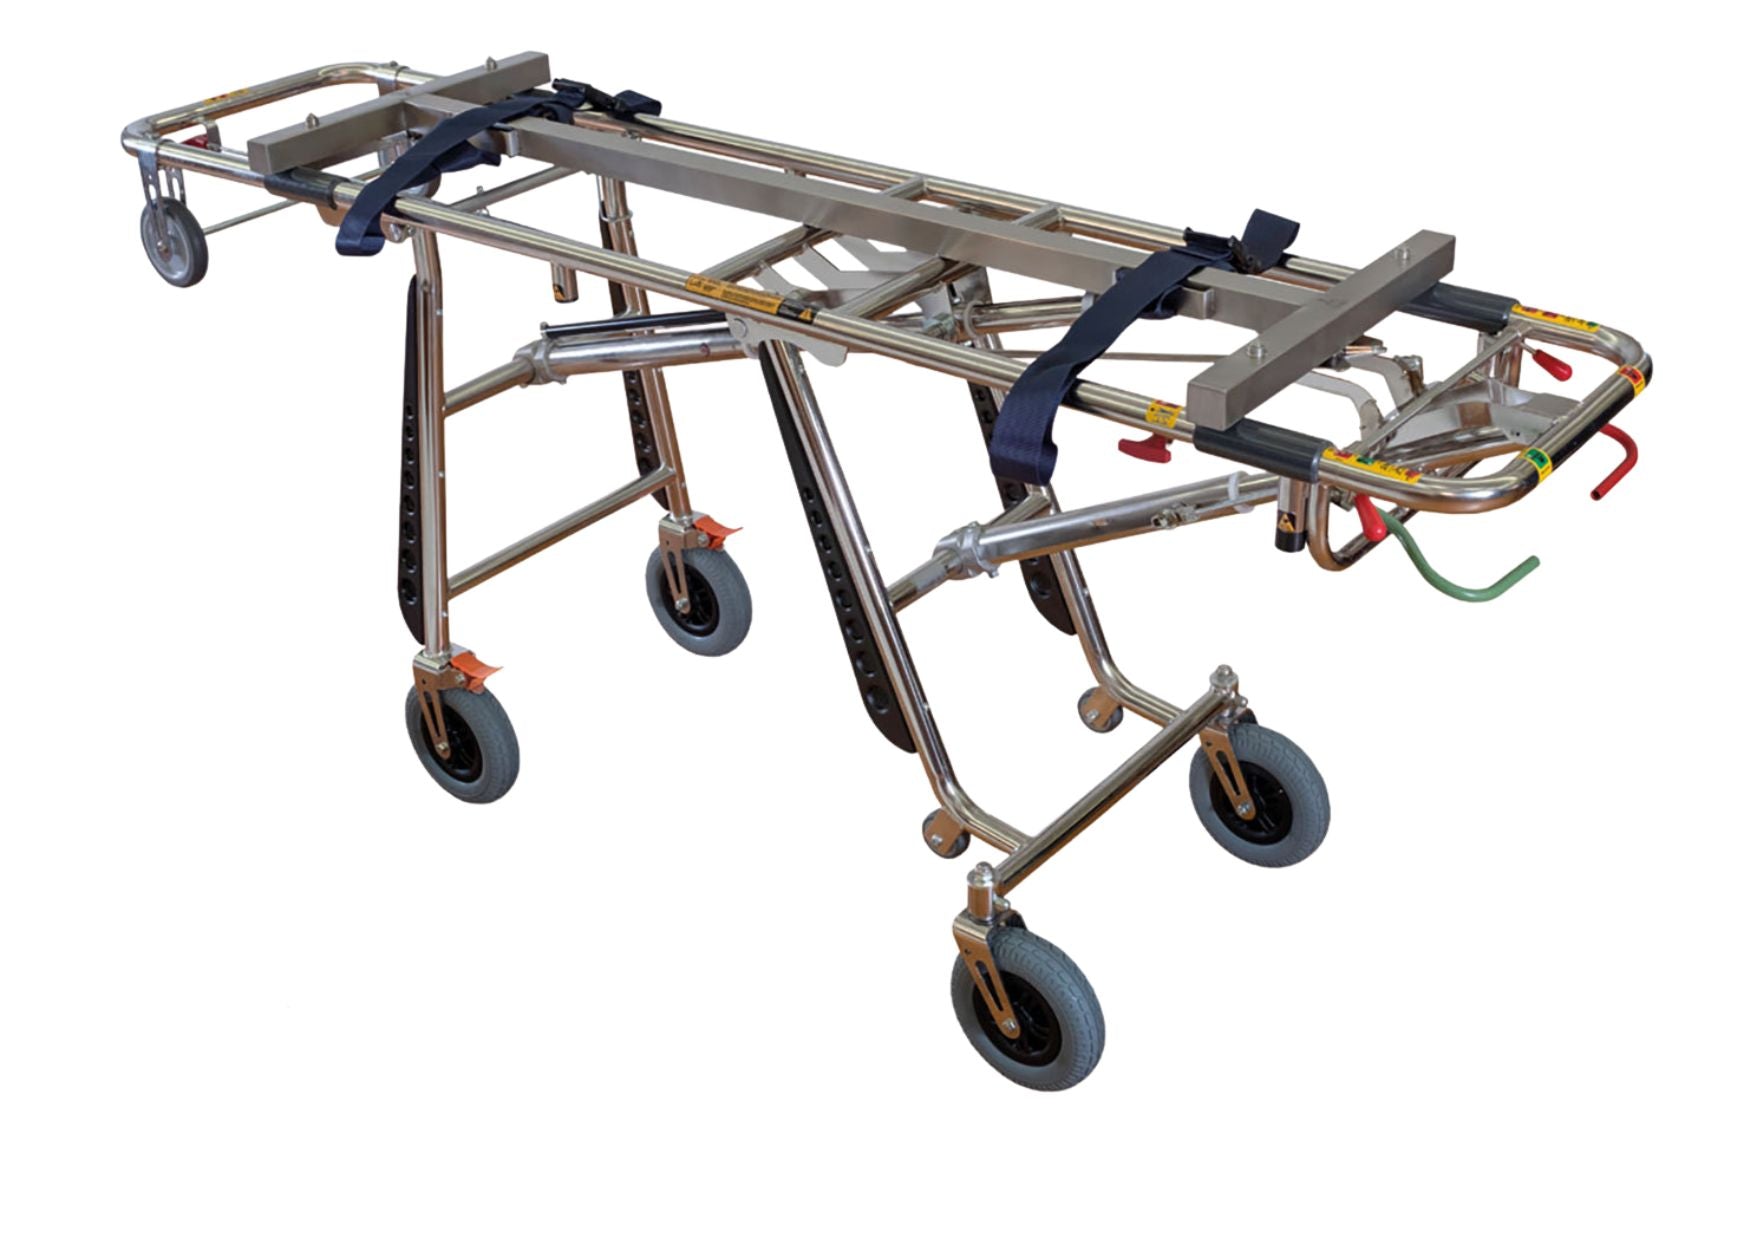 Roll-in chassis